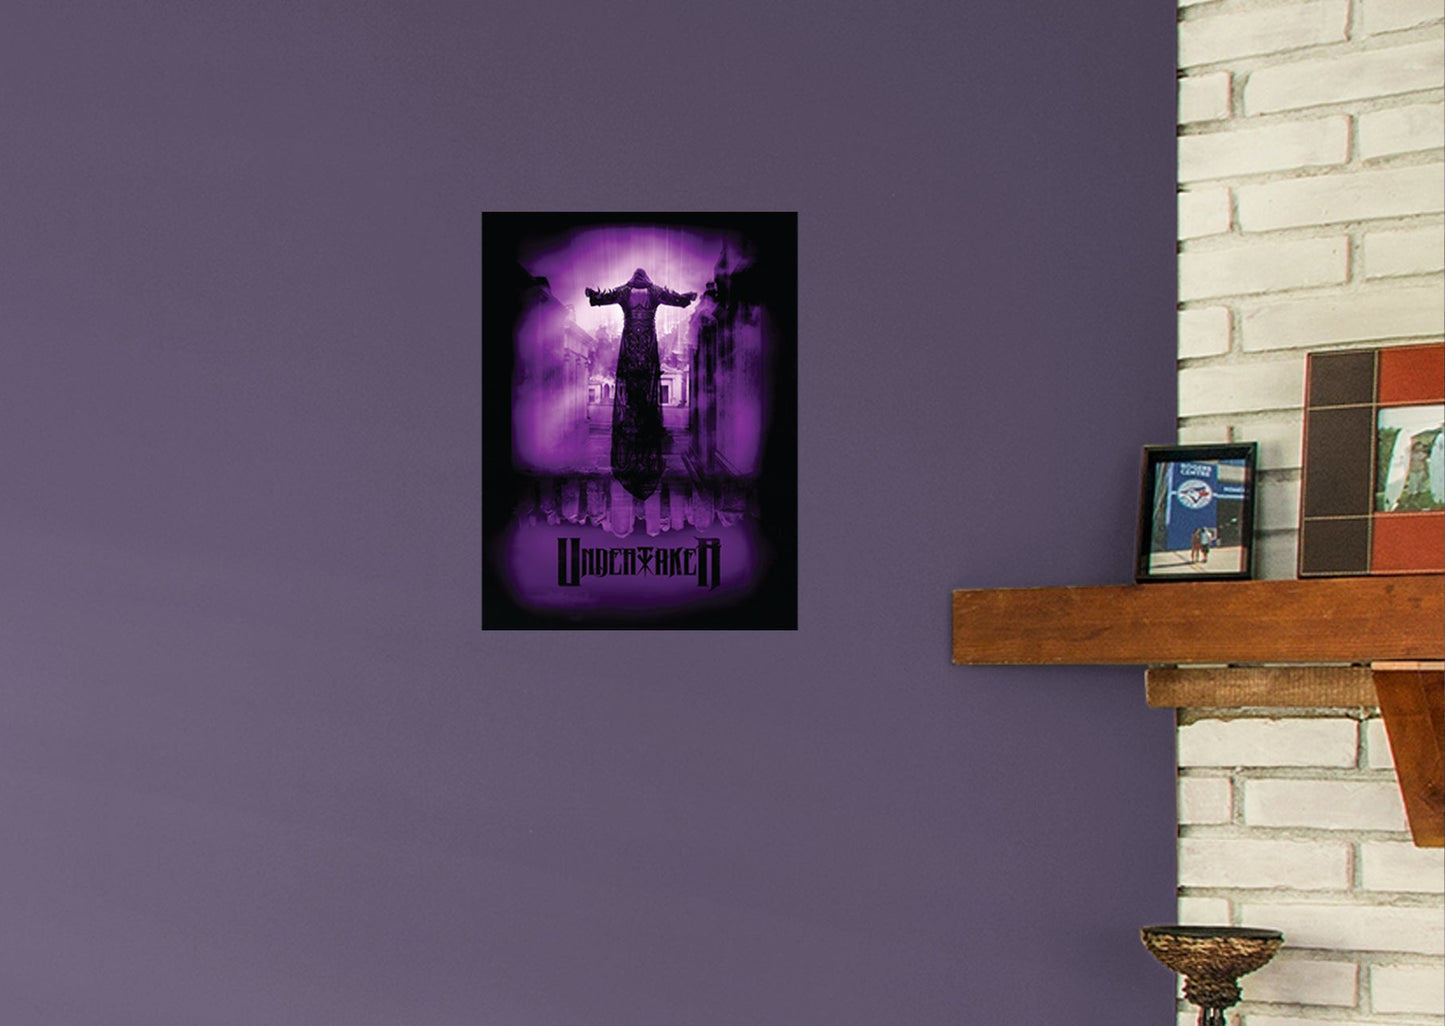 Undertaker  Mural        - Officially Licensed WWE Removable Wall   Adhesive Decal